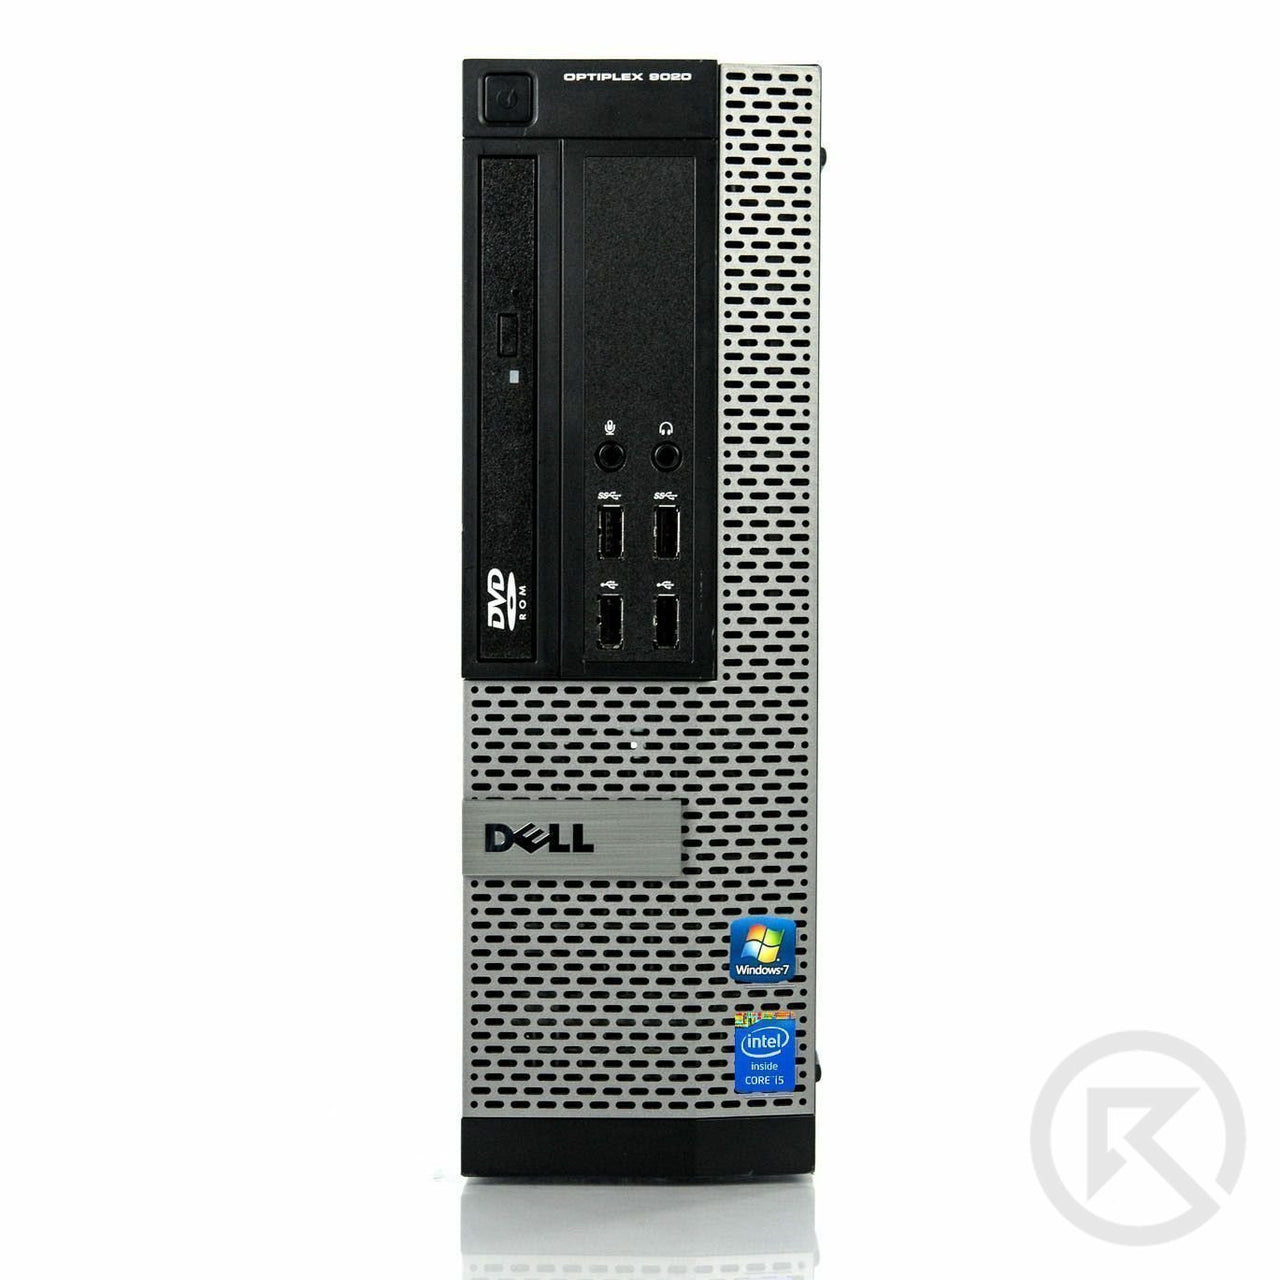 Dell Optiplex 7020 Intel Core I5 4th Generation Small Form Factor-Computer-RefurbConnect-Refurbished-Computers-Laptops-Printers-New York